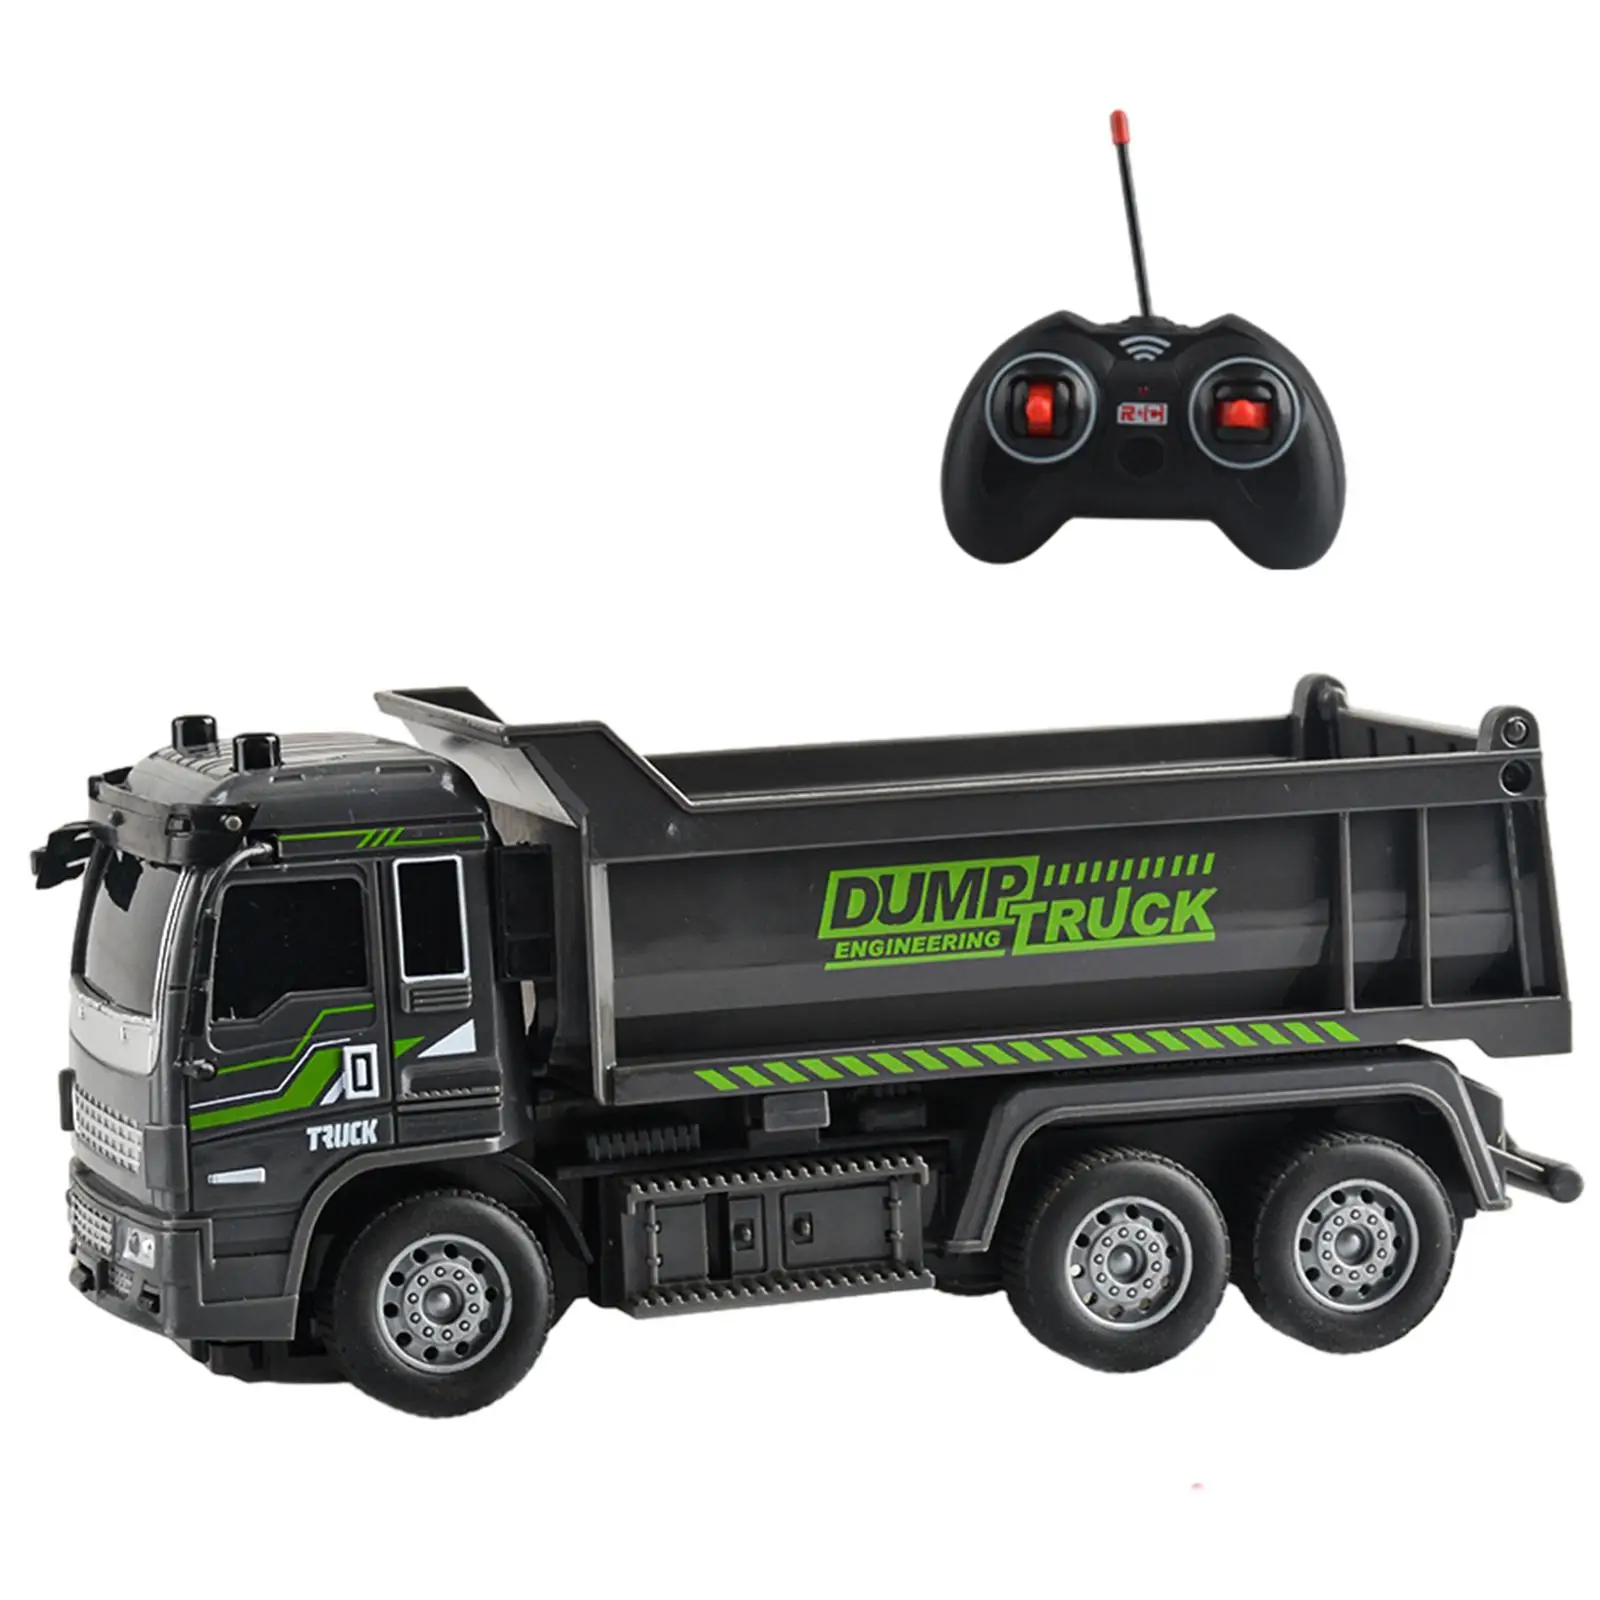 Electric Construction Model Toy Car Remote Control Truck for Boys Children